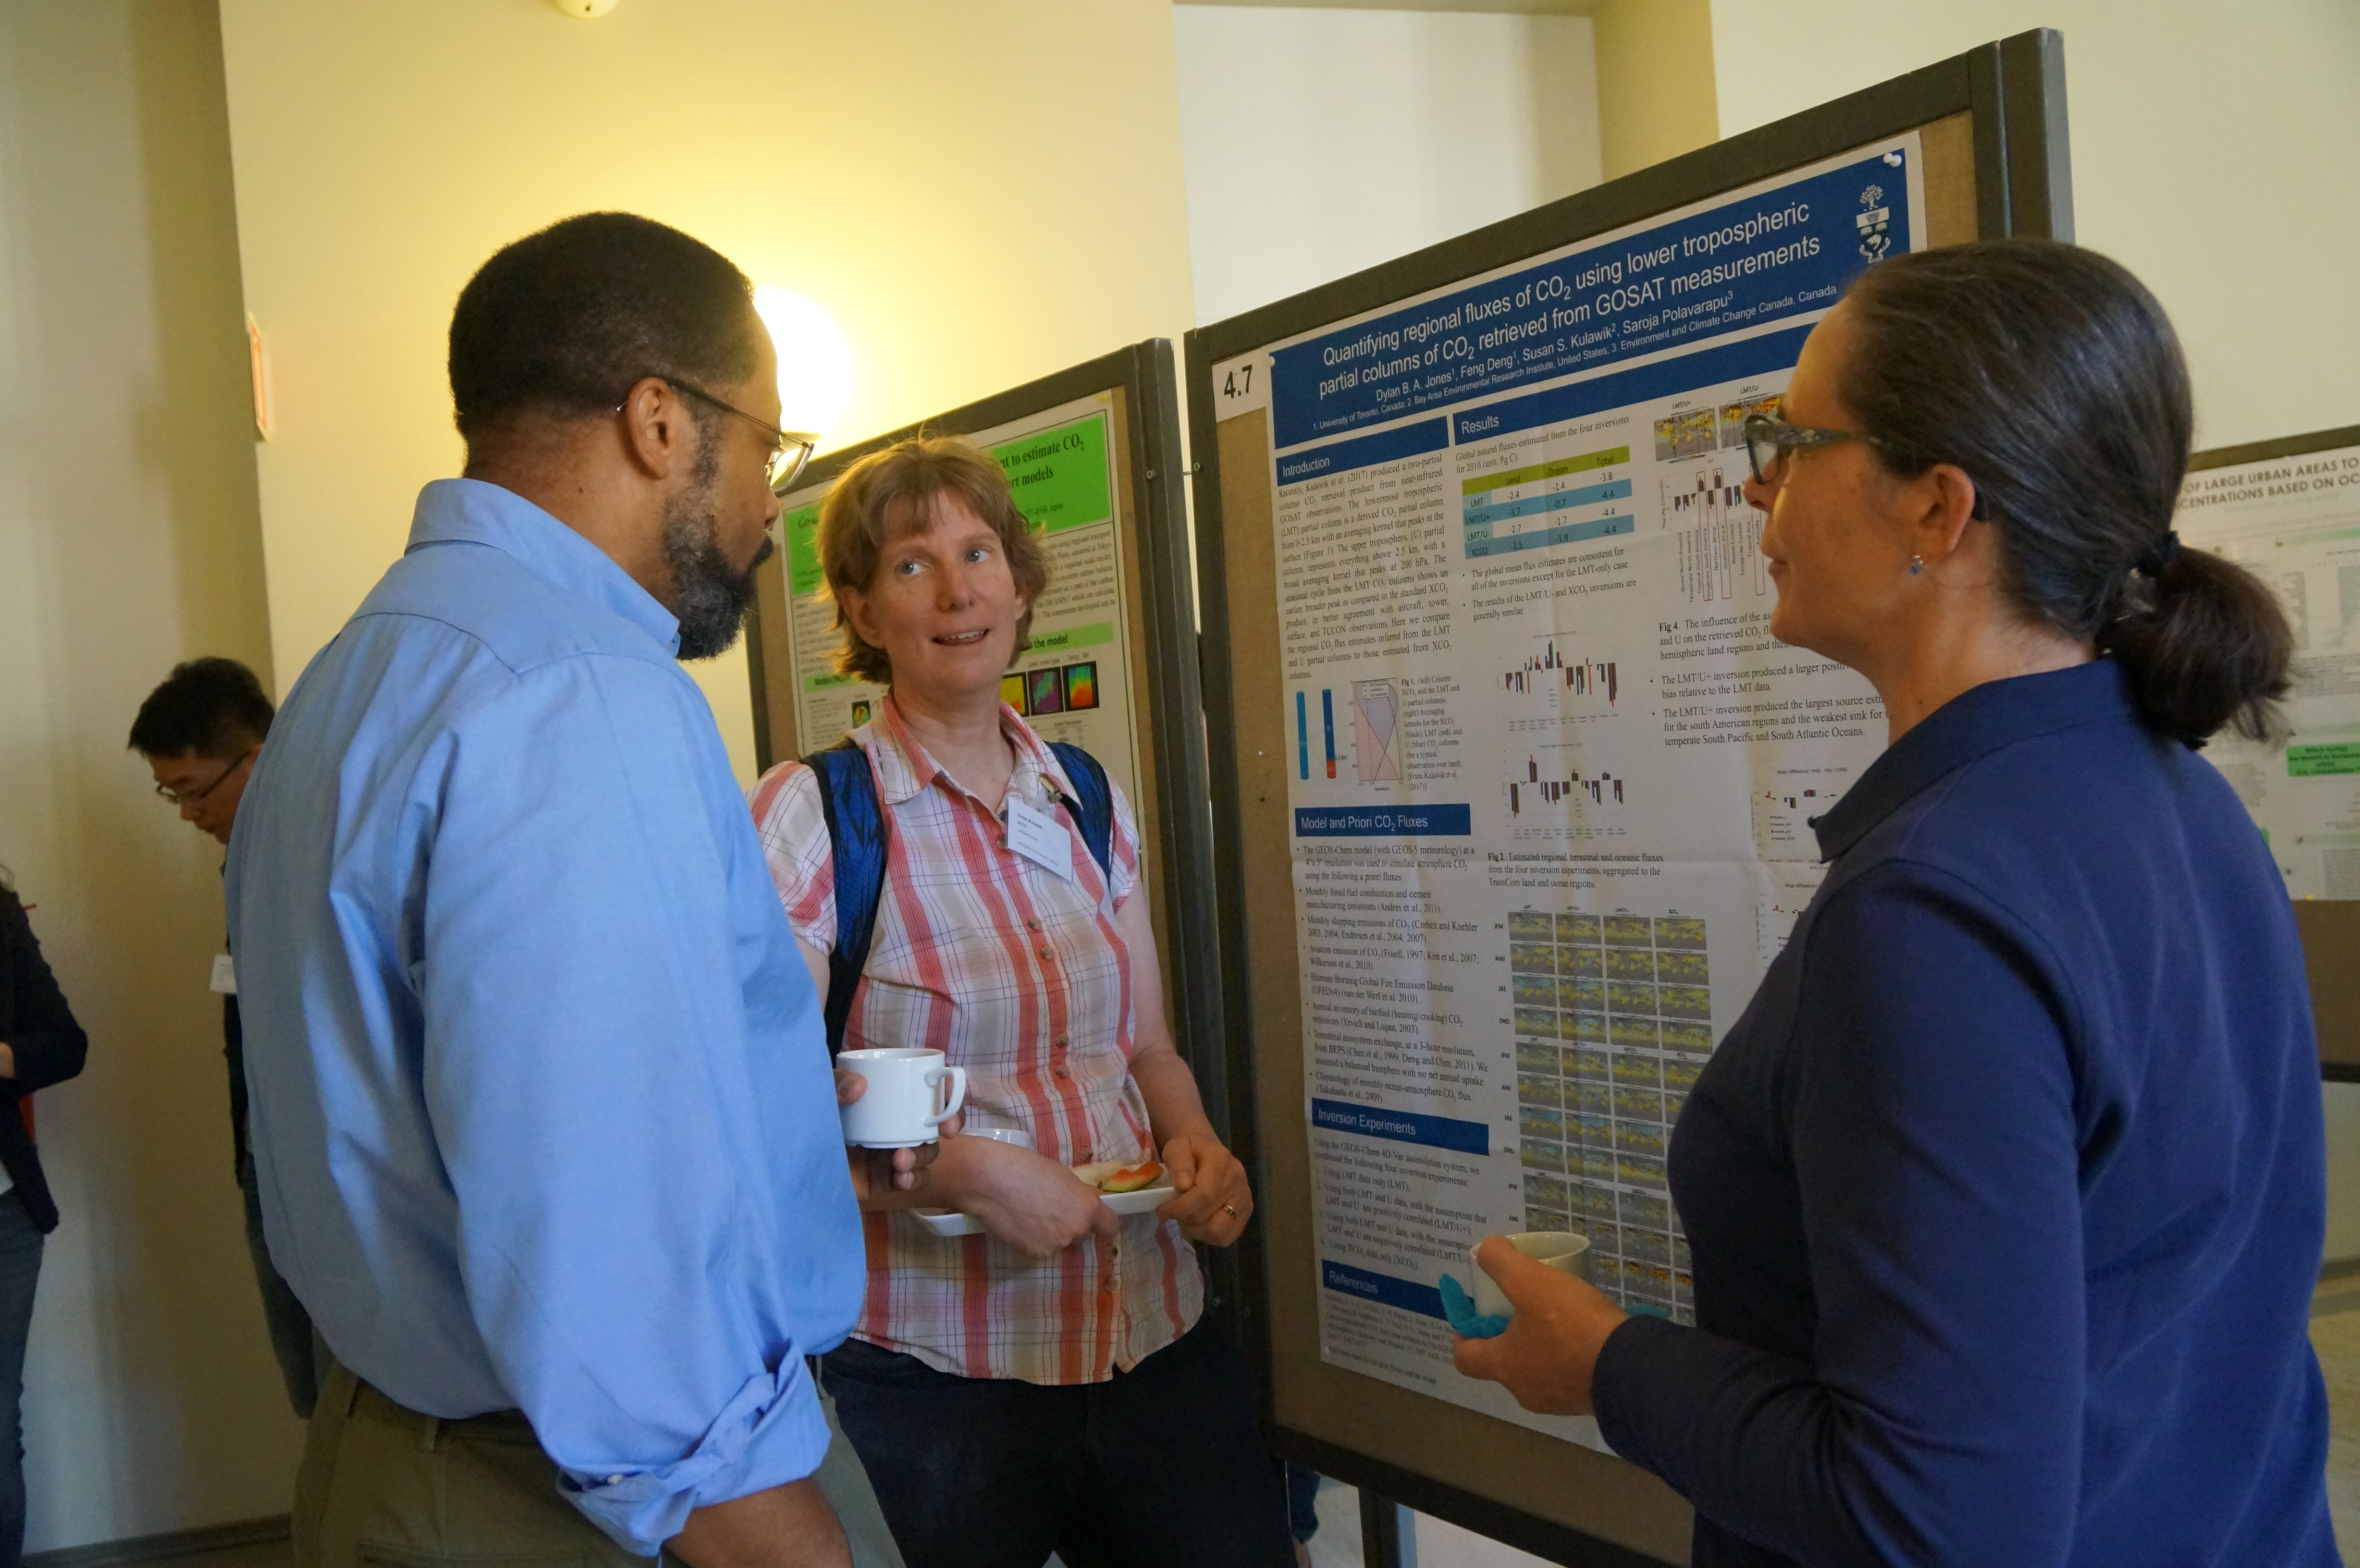 Annmarie is standing around a poster during a poster conference session with two other people. 